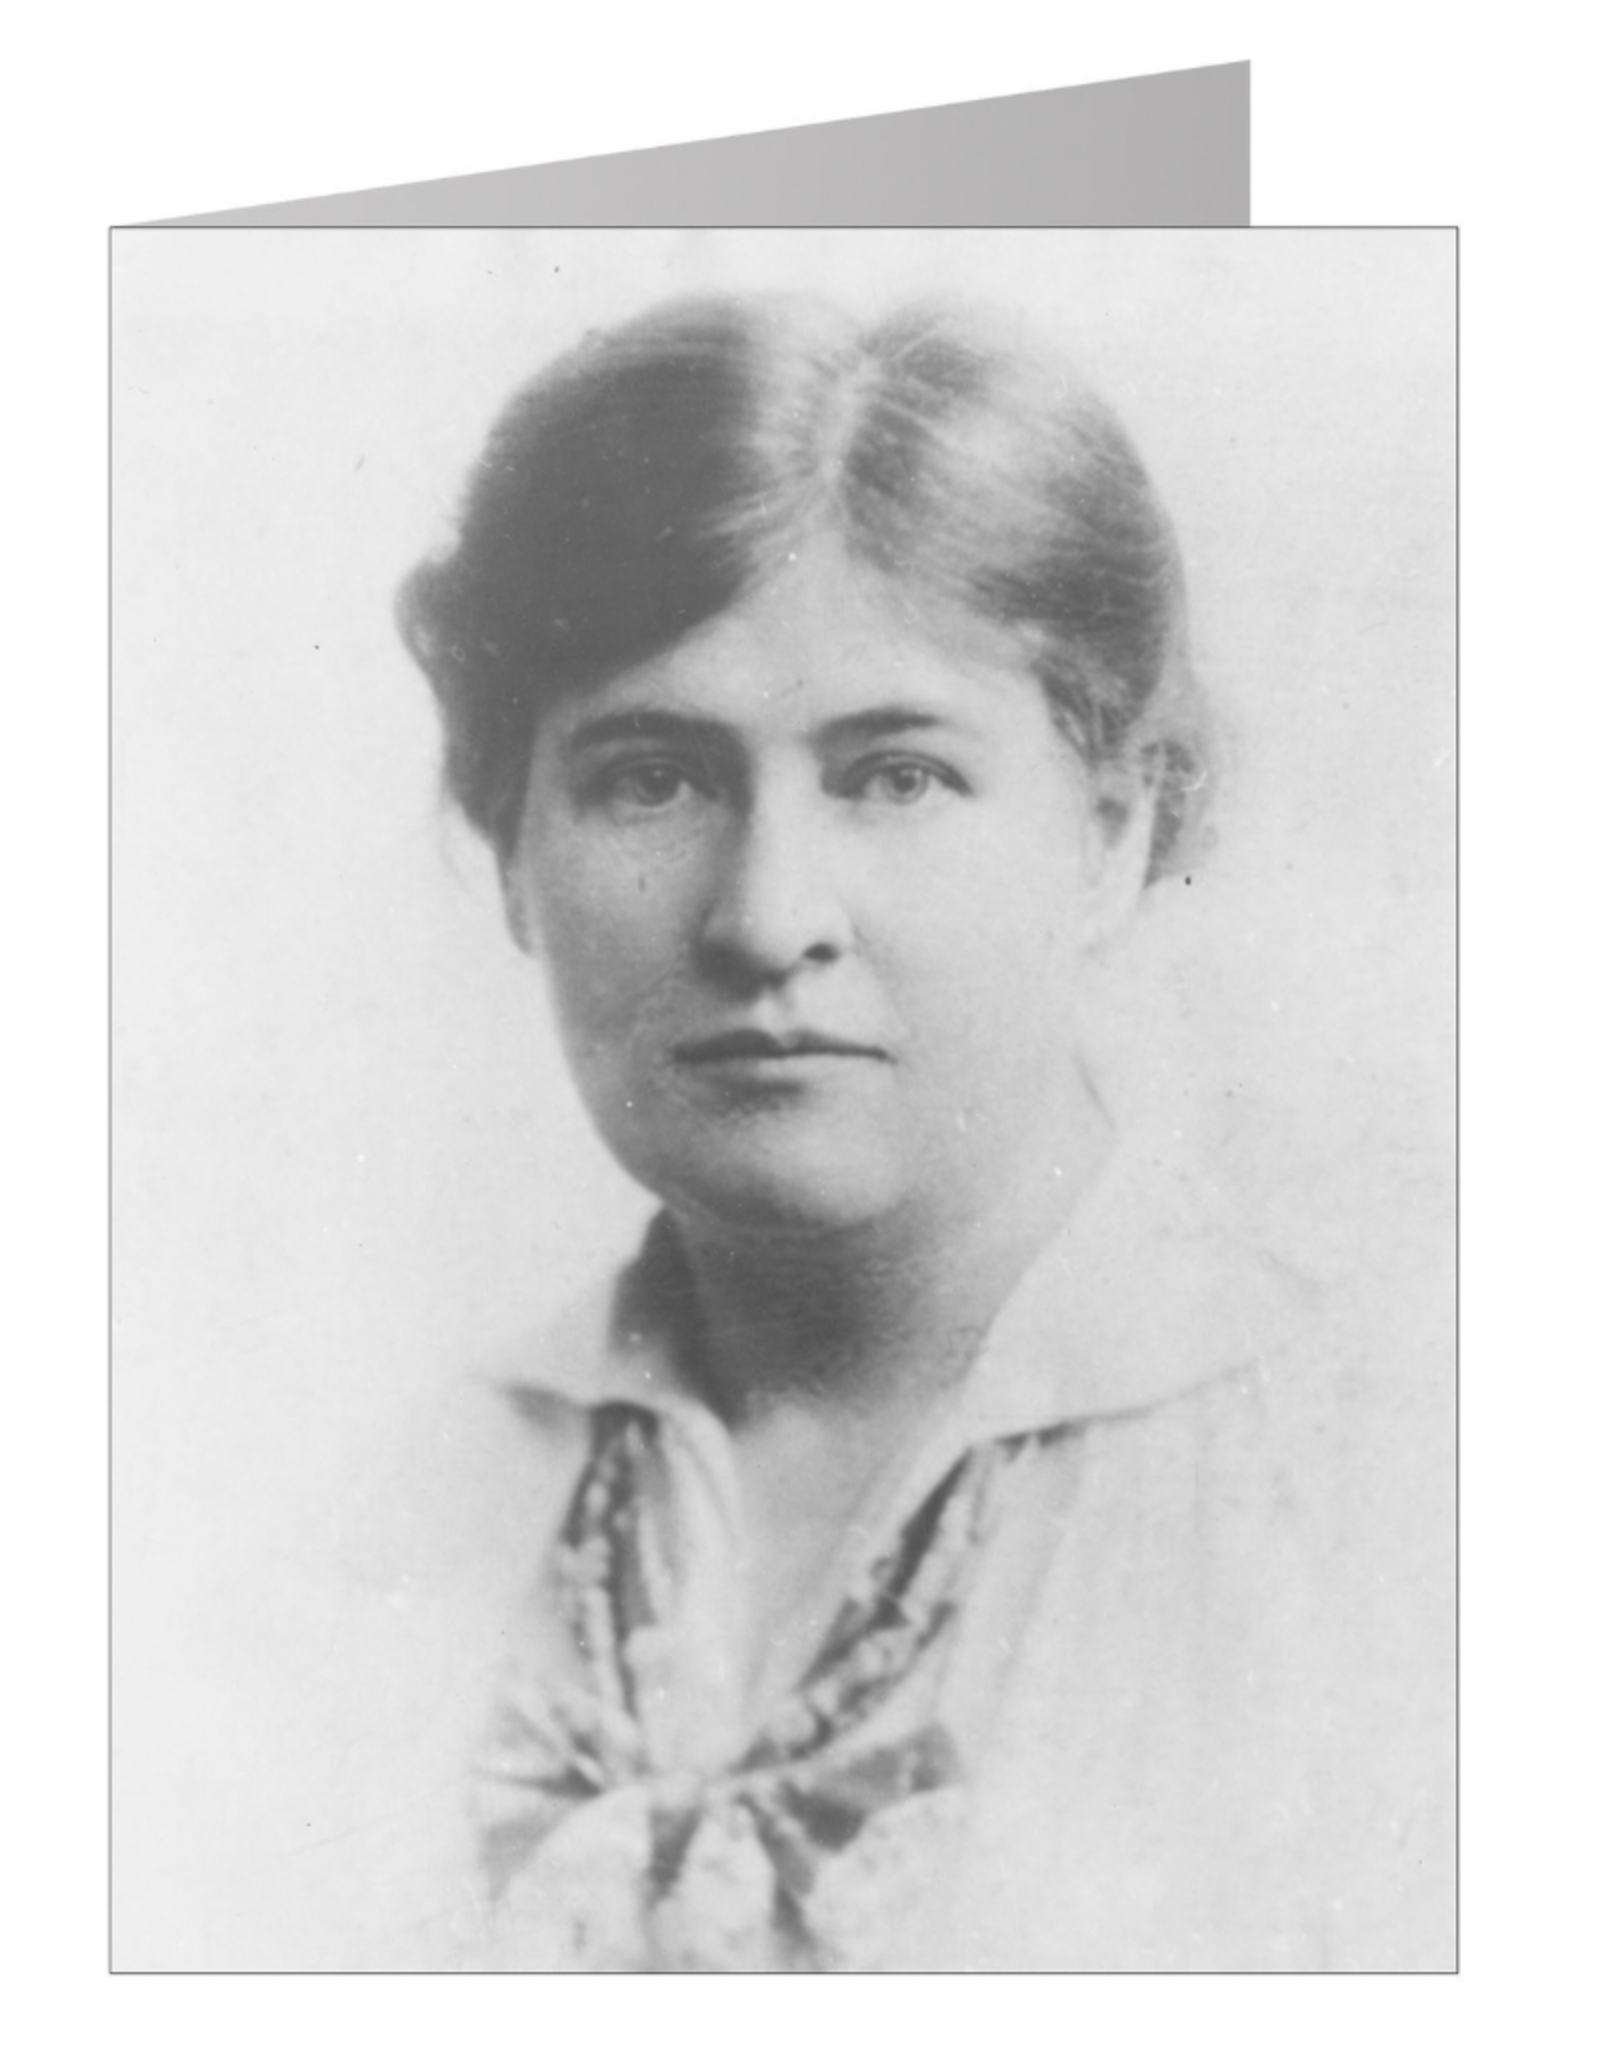 Boxed Set of 8 Willa Cather Portrait Note Cards